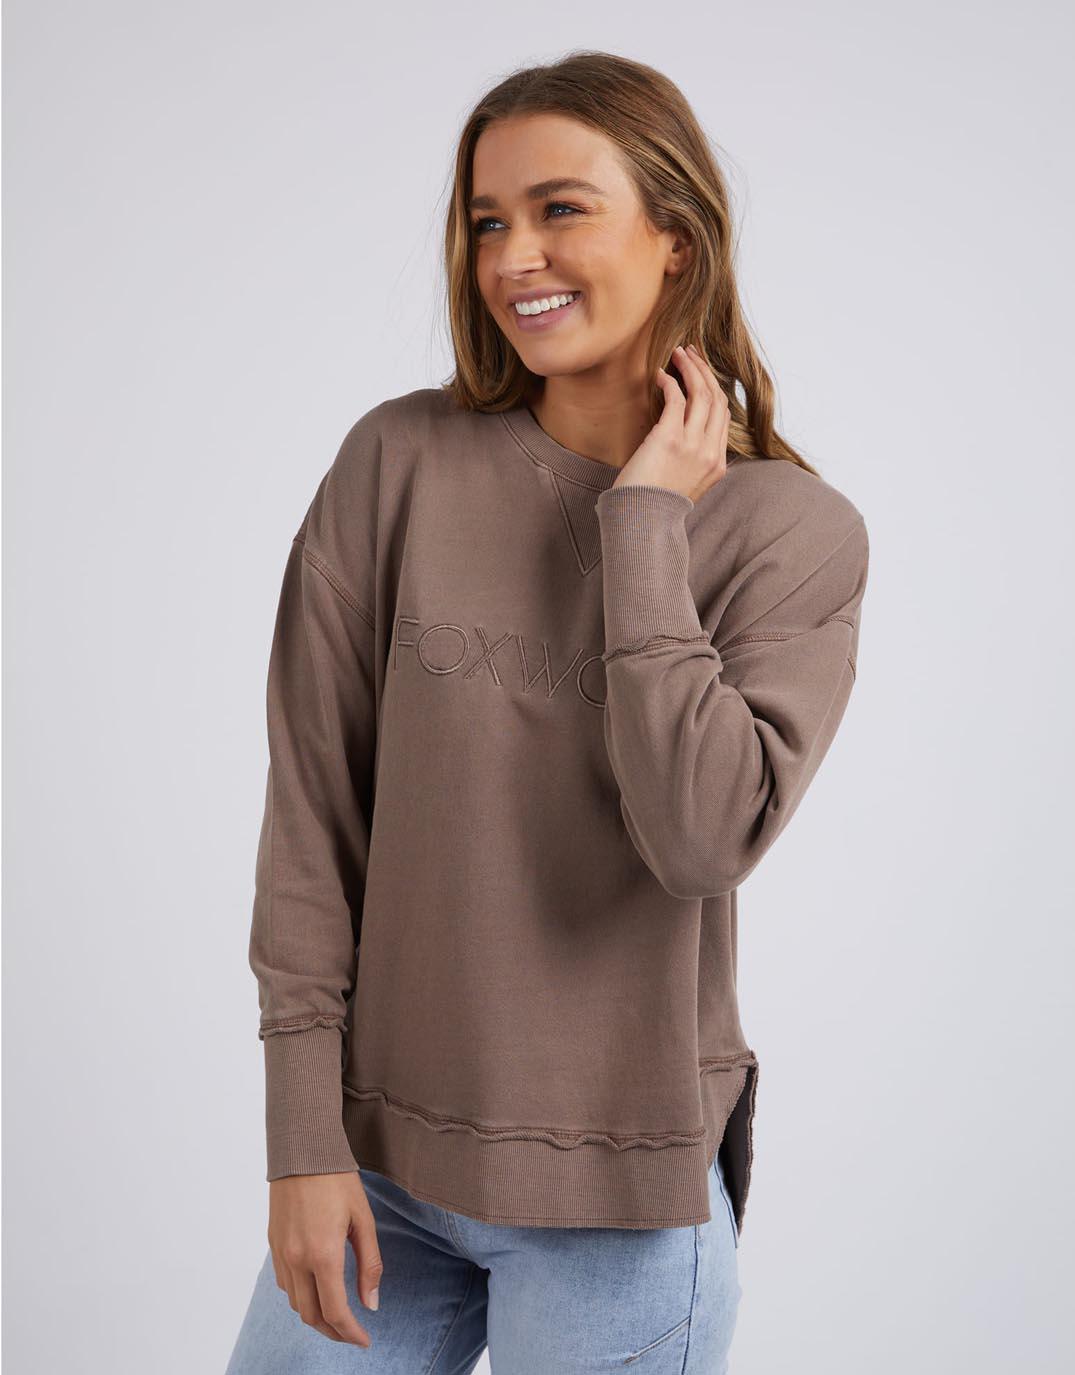 Foxwood - Simplified Crew - Chocolate Brown - White & Co Living Jumpers